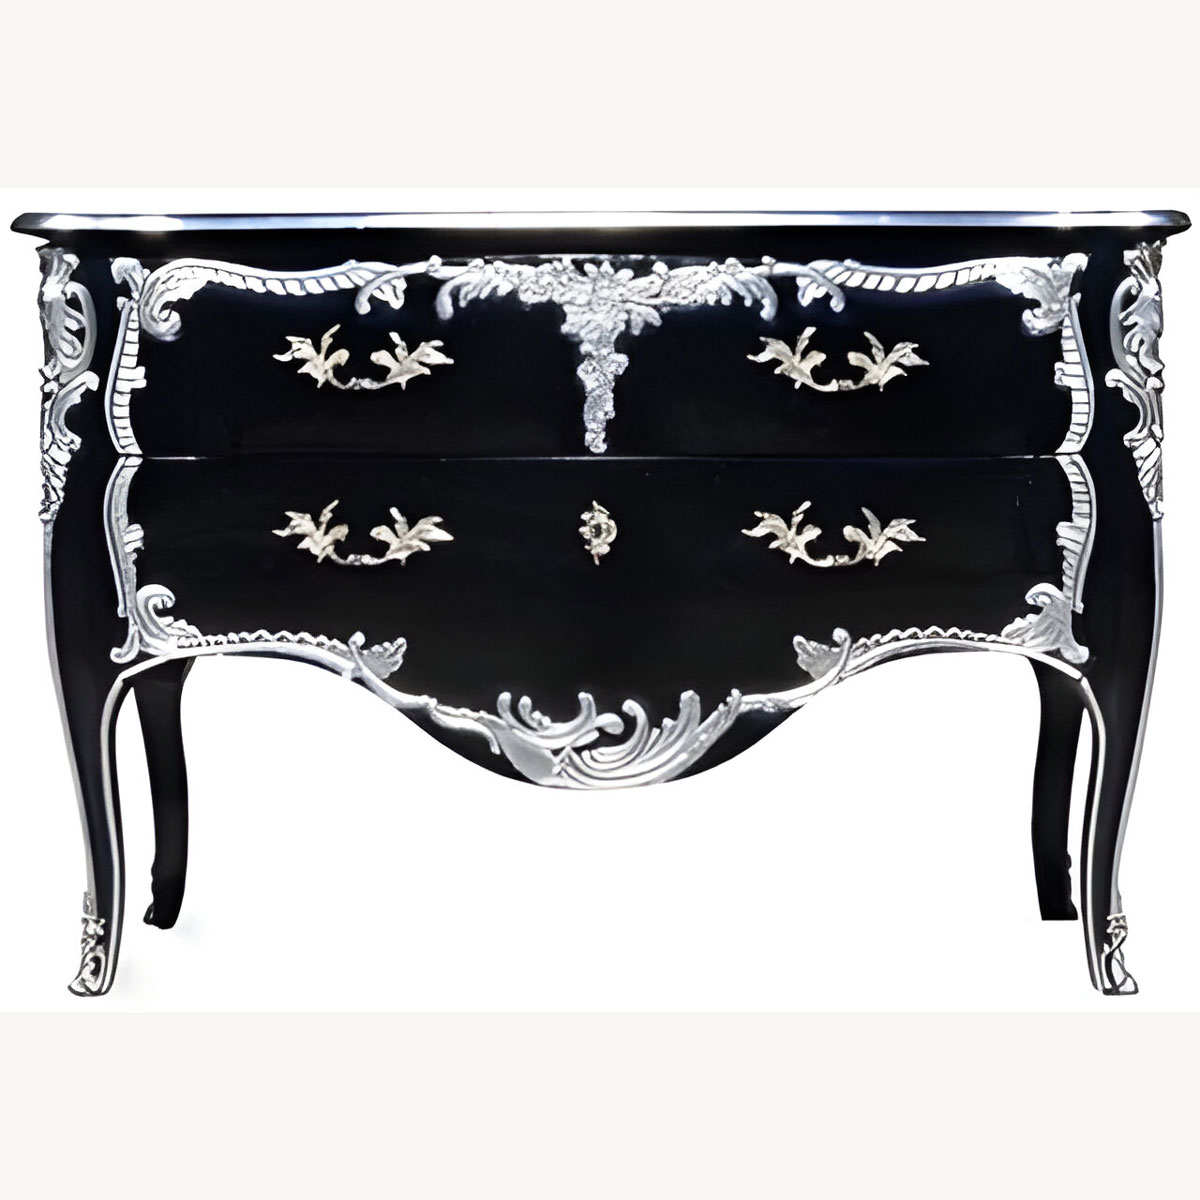 A Black Duboy 2 Drawer Chest Baroque Fabulous French Reproduction Louis Xvi Rococo Commode With Gold Or Silver 2 - Hampshire Barn Interiors - A Black Duboy 2 Drawer Chest Baroque Fabulous French Reproduction Louis Xvi Rococo Commode With Gold Or Silver -